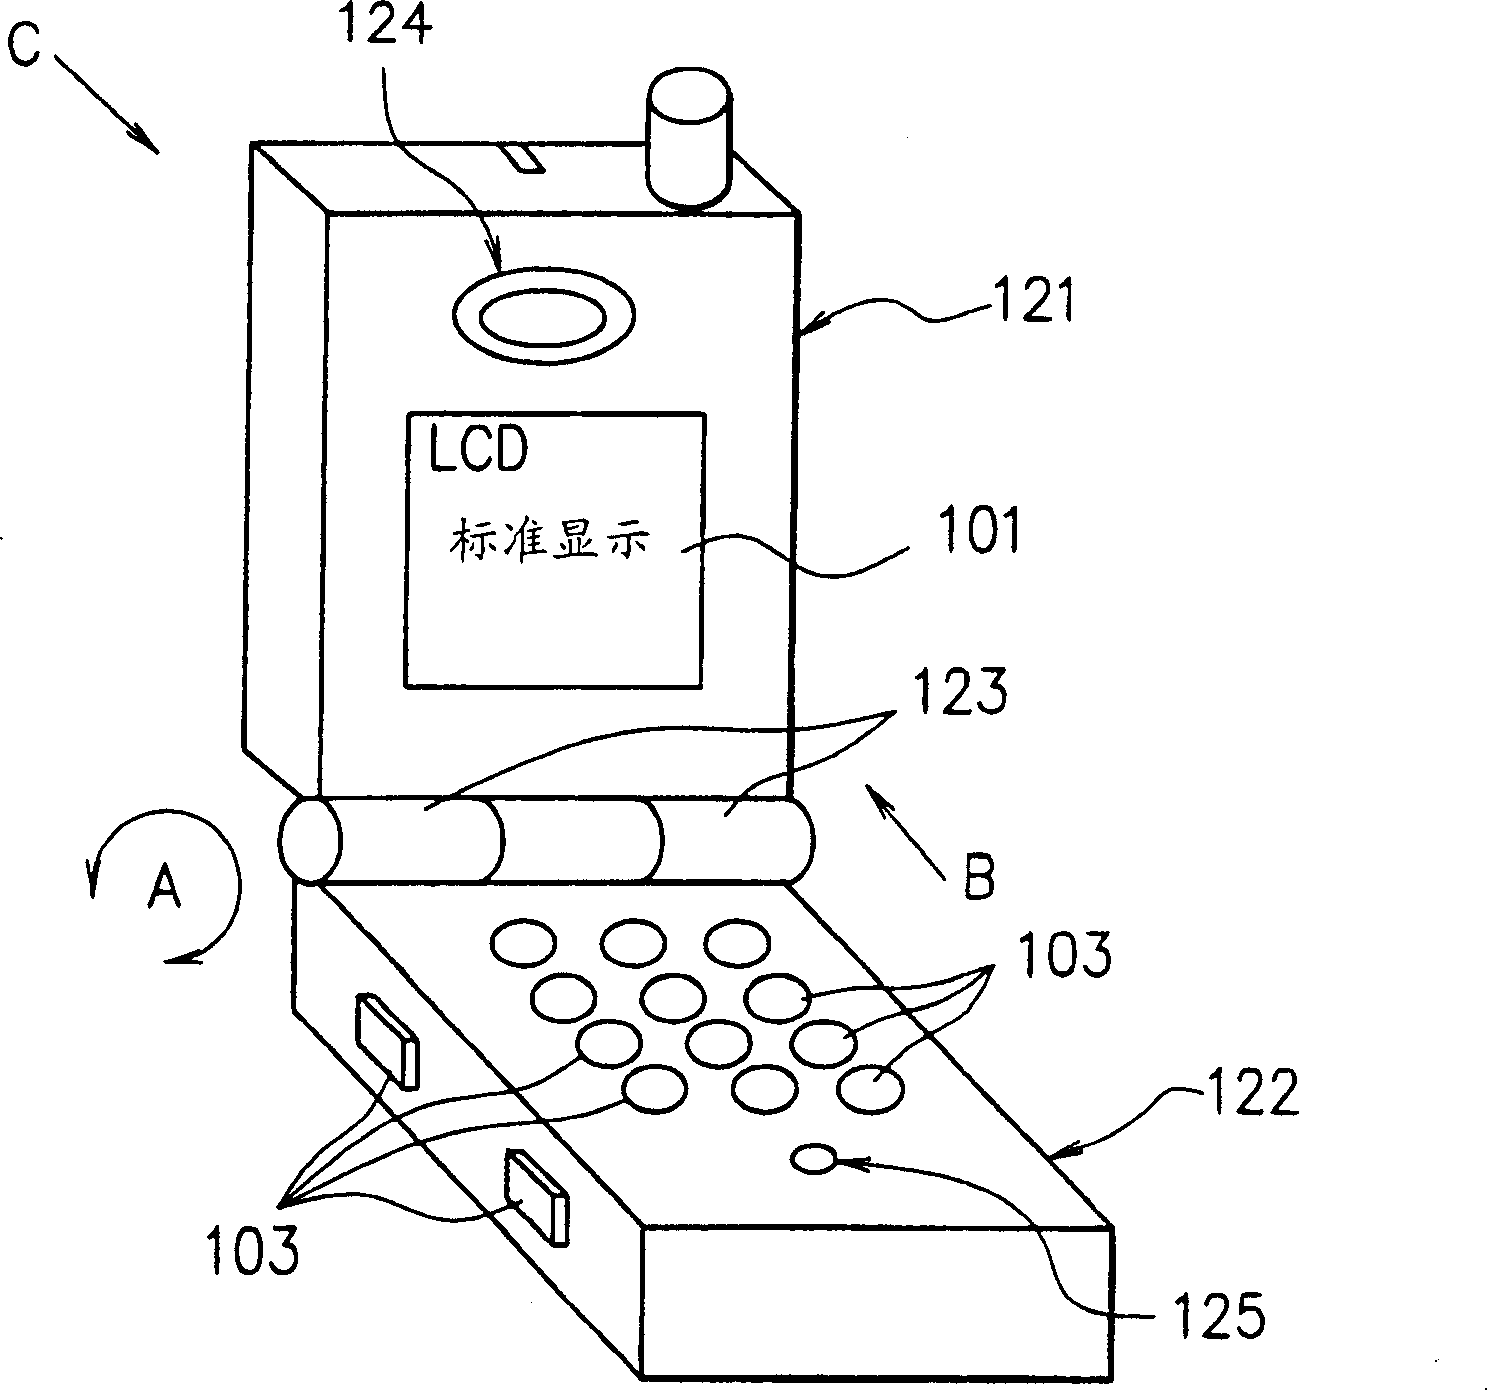 Electronic device with LCD